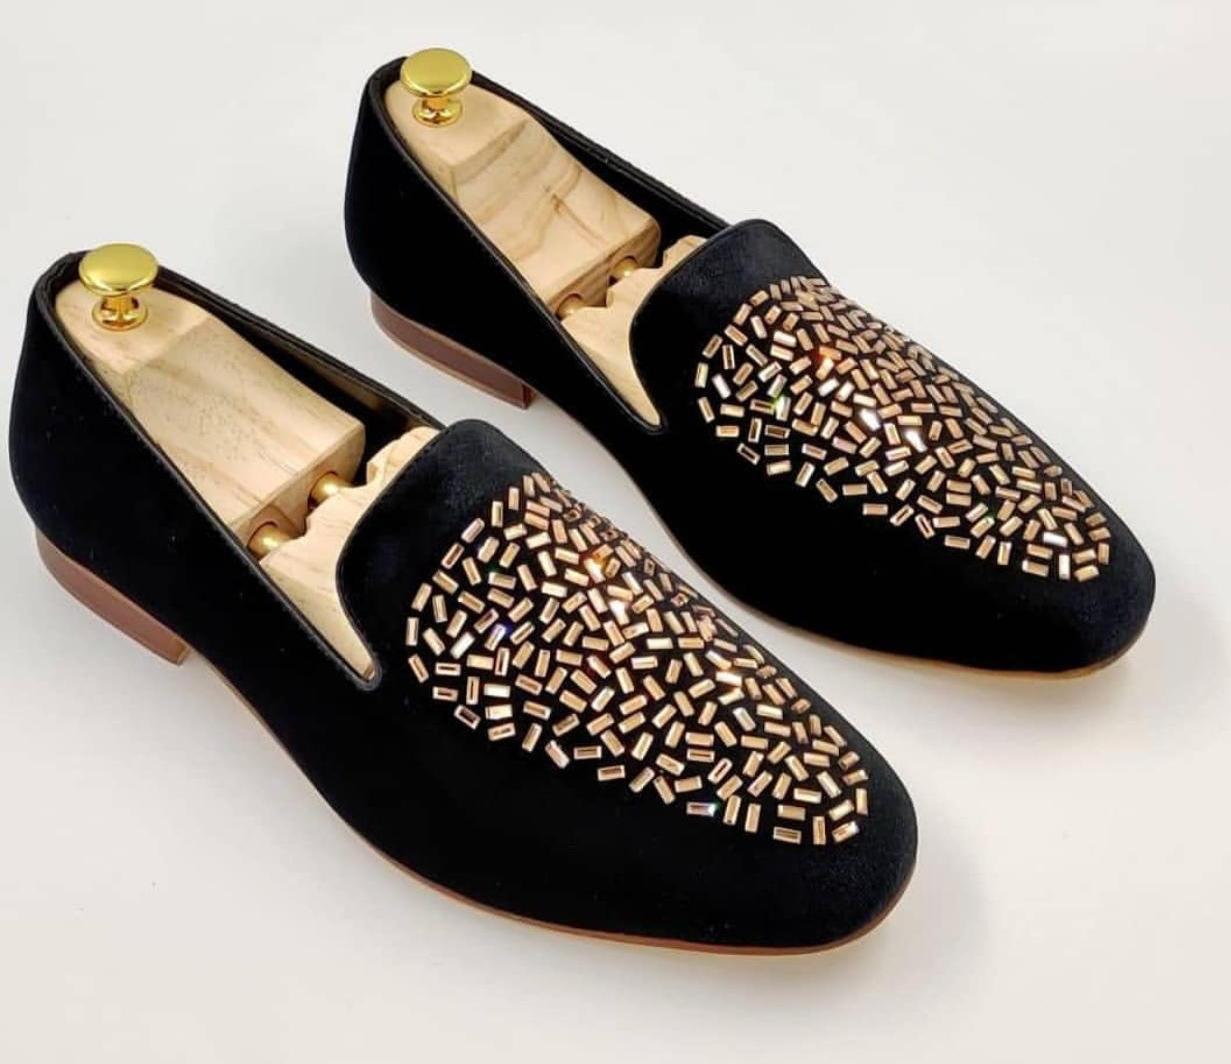 Buy Now Fashion Studded Suede Loafer Shoes For Partywear And Casualwear - Sunglassesmart